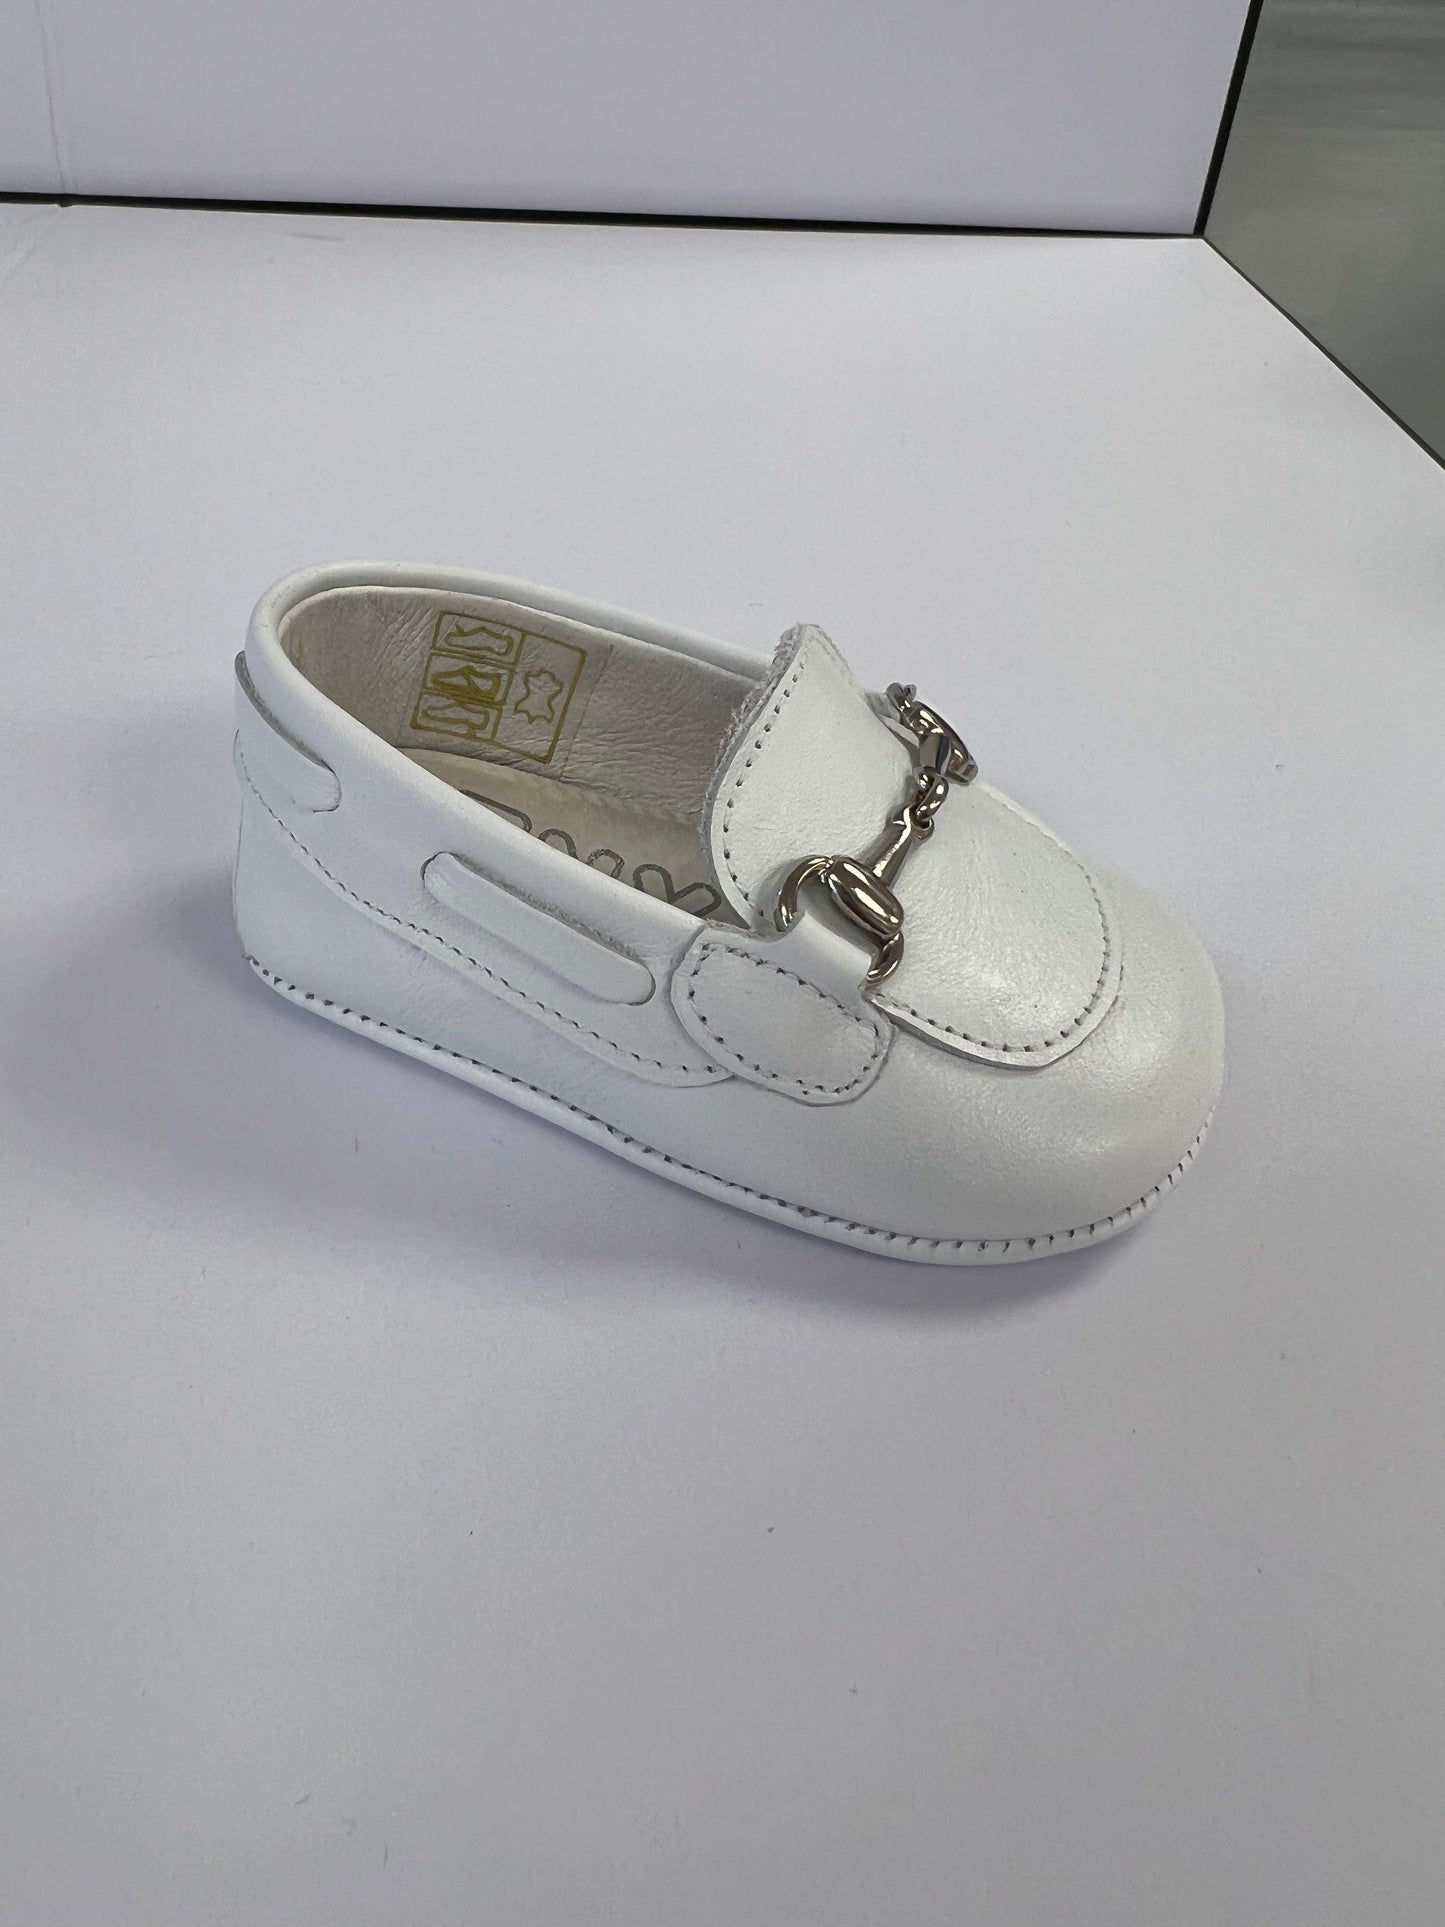 17039 White Snaffle Bit Loafers - Fallons Kids